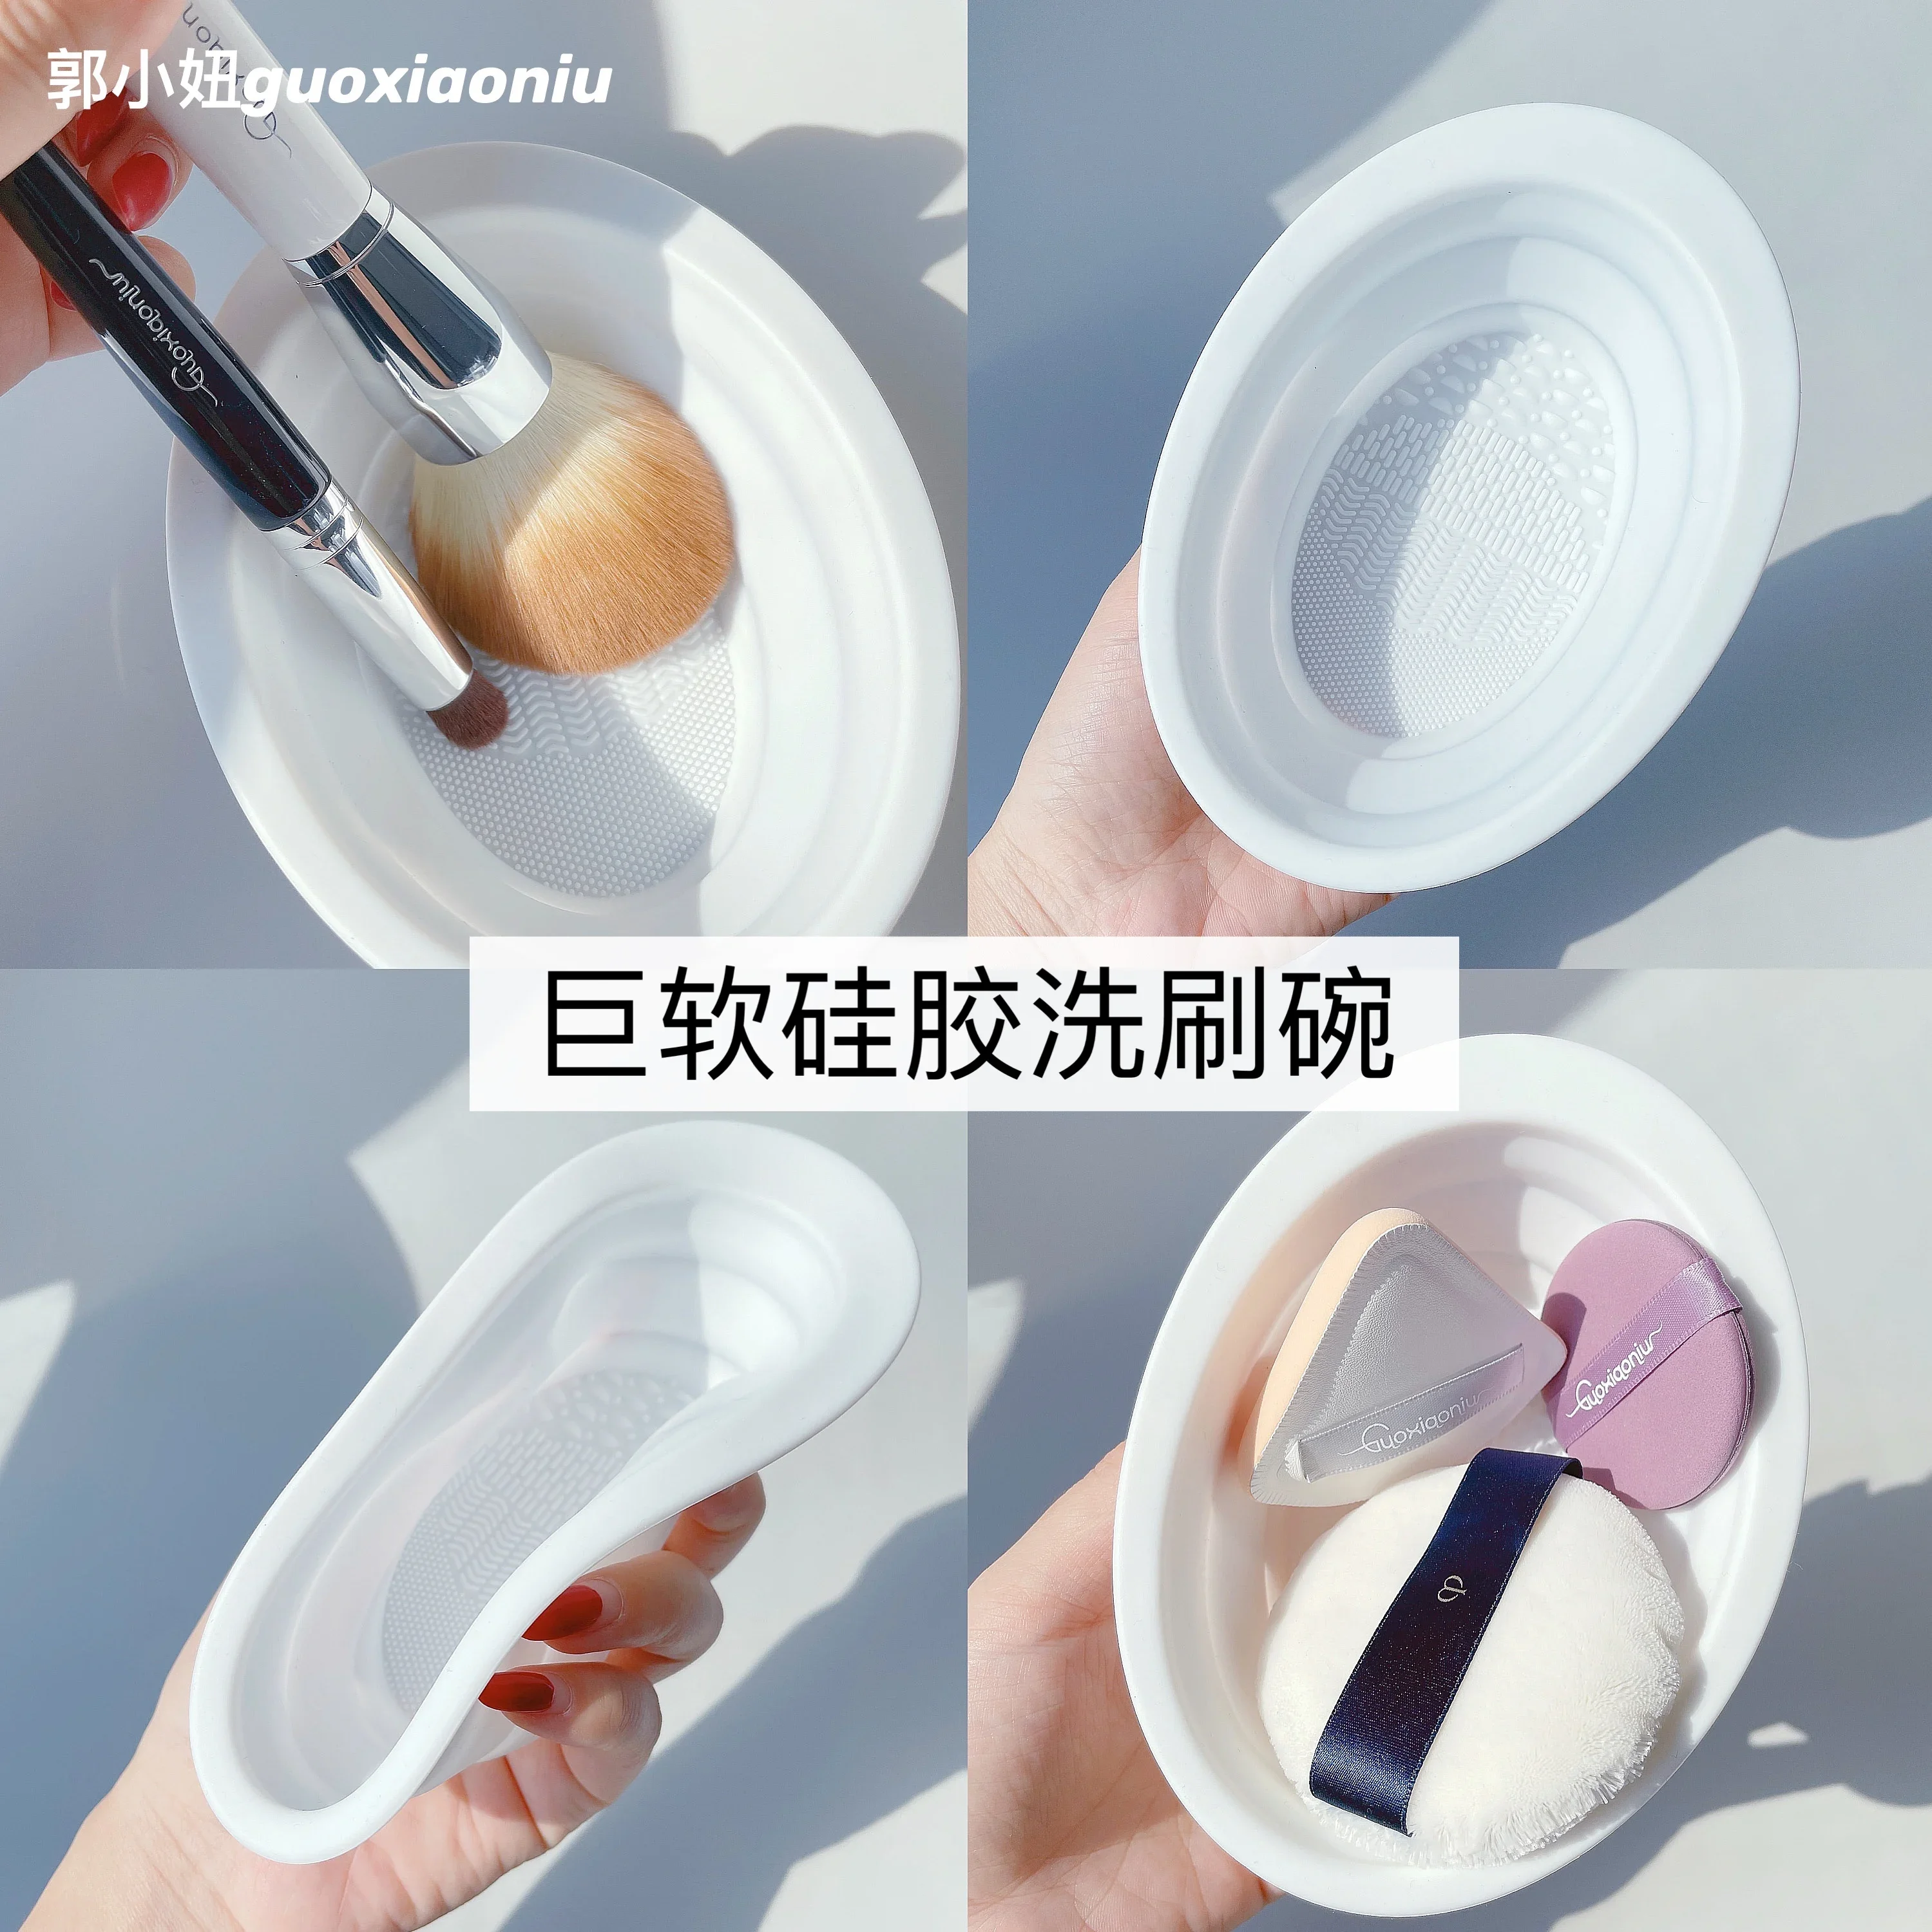 Guo Xiaoniu Cleanser of Makeup Brush! Very Soft Silica Gel Scrubbing Bowl Sponge Deep Cleaning Does Not Hurt Bristle Foldable